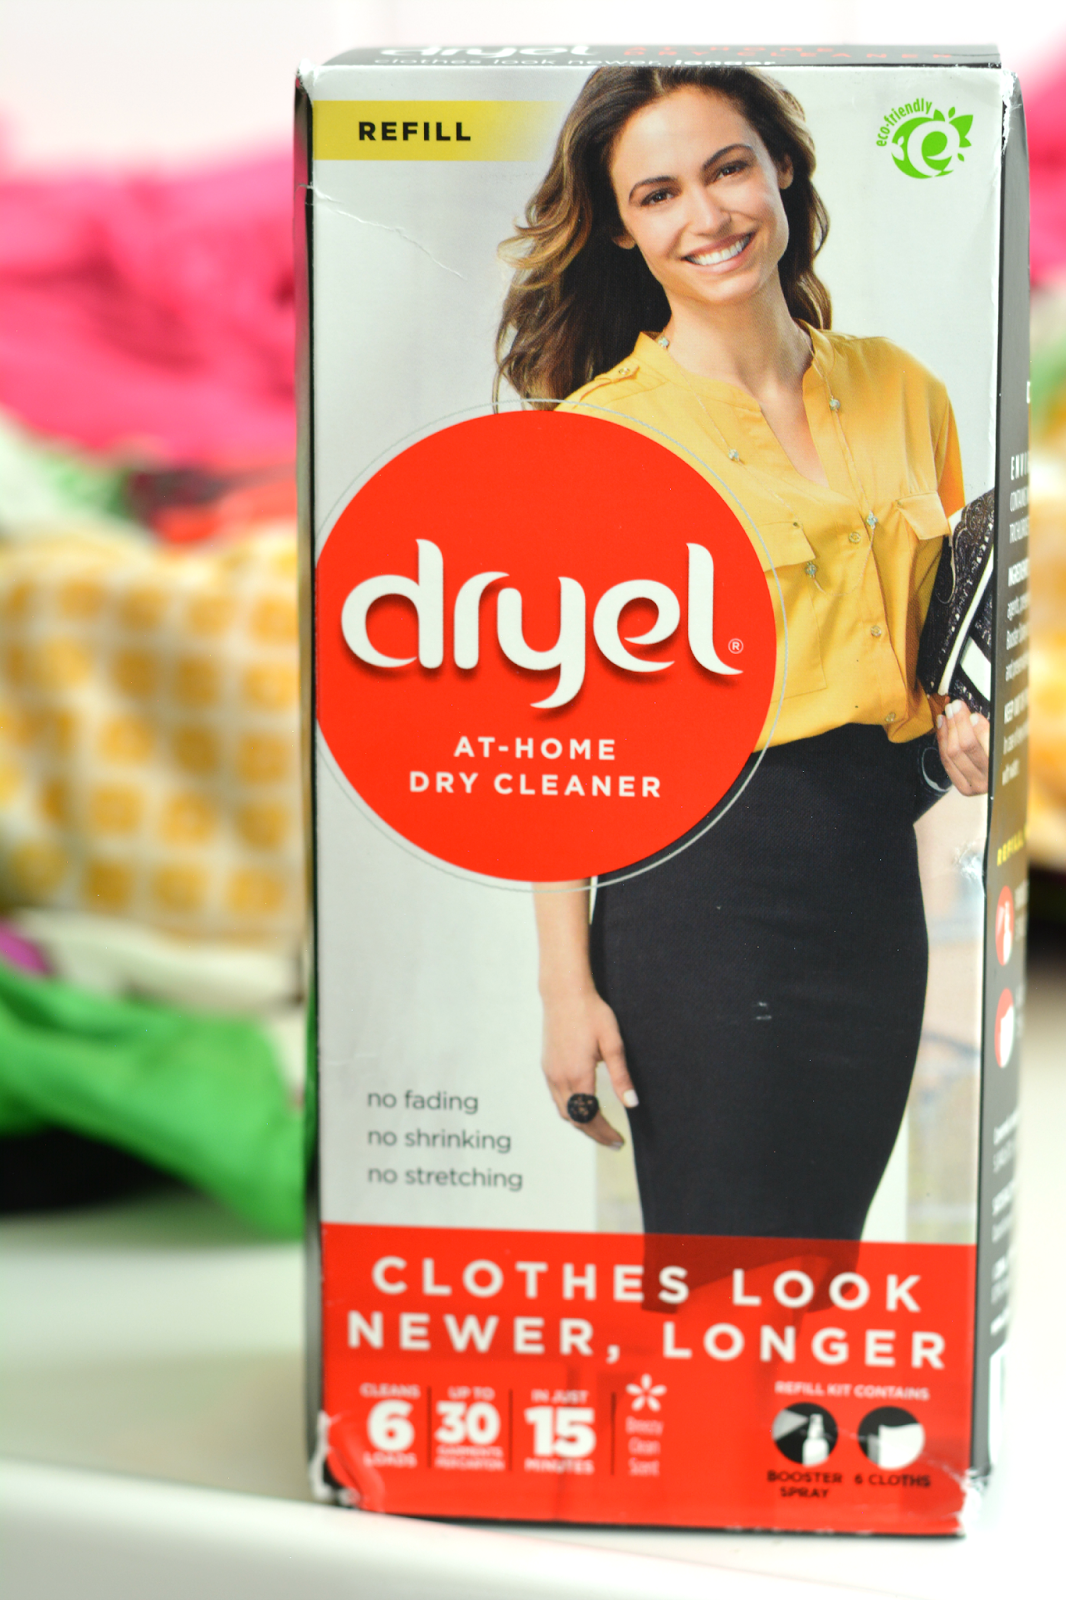 dryel dry cleans and freshens without harsh chemicals